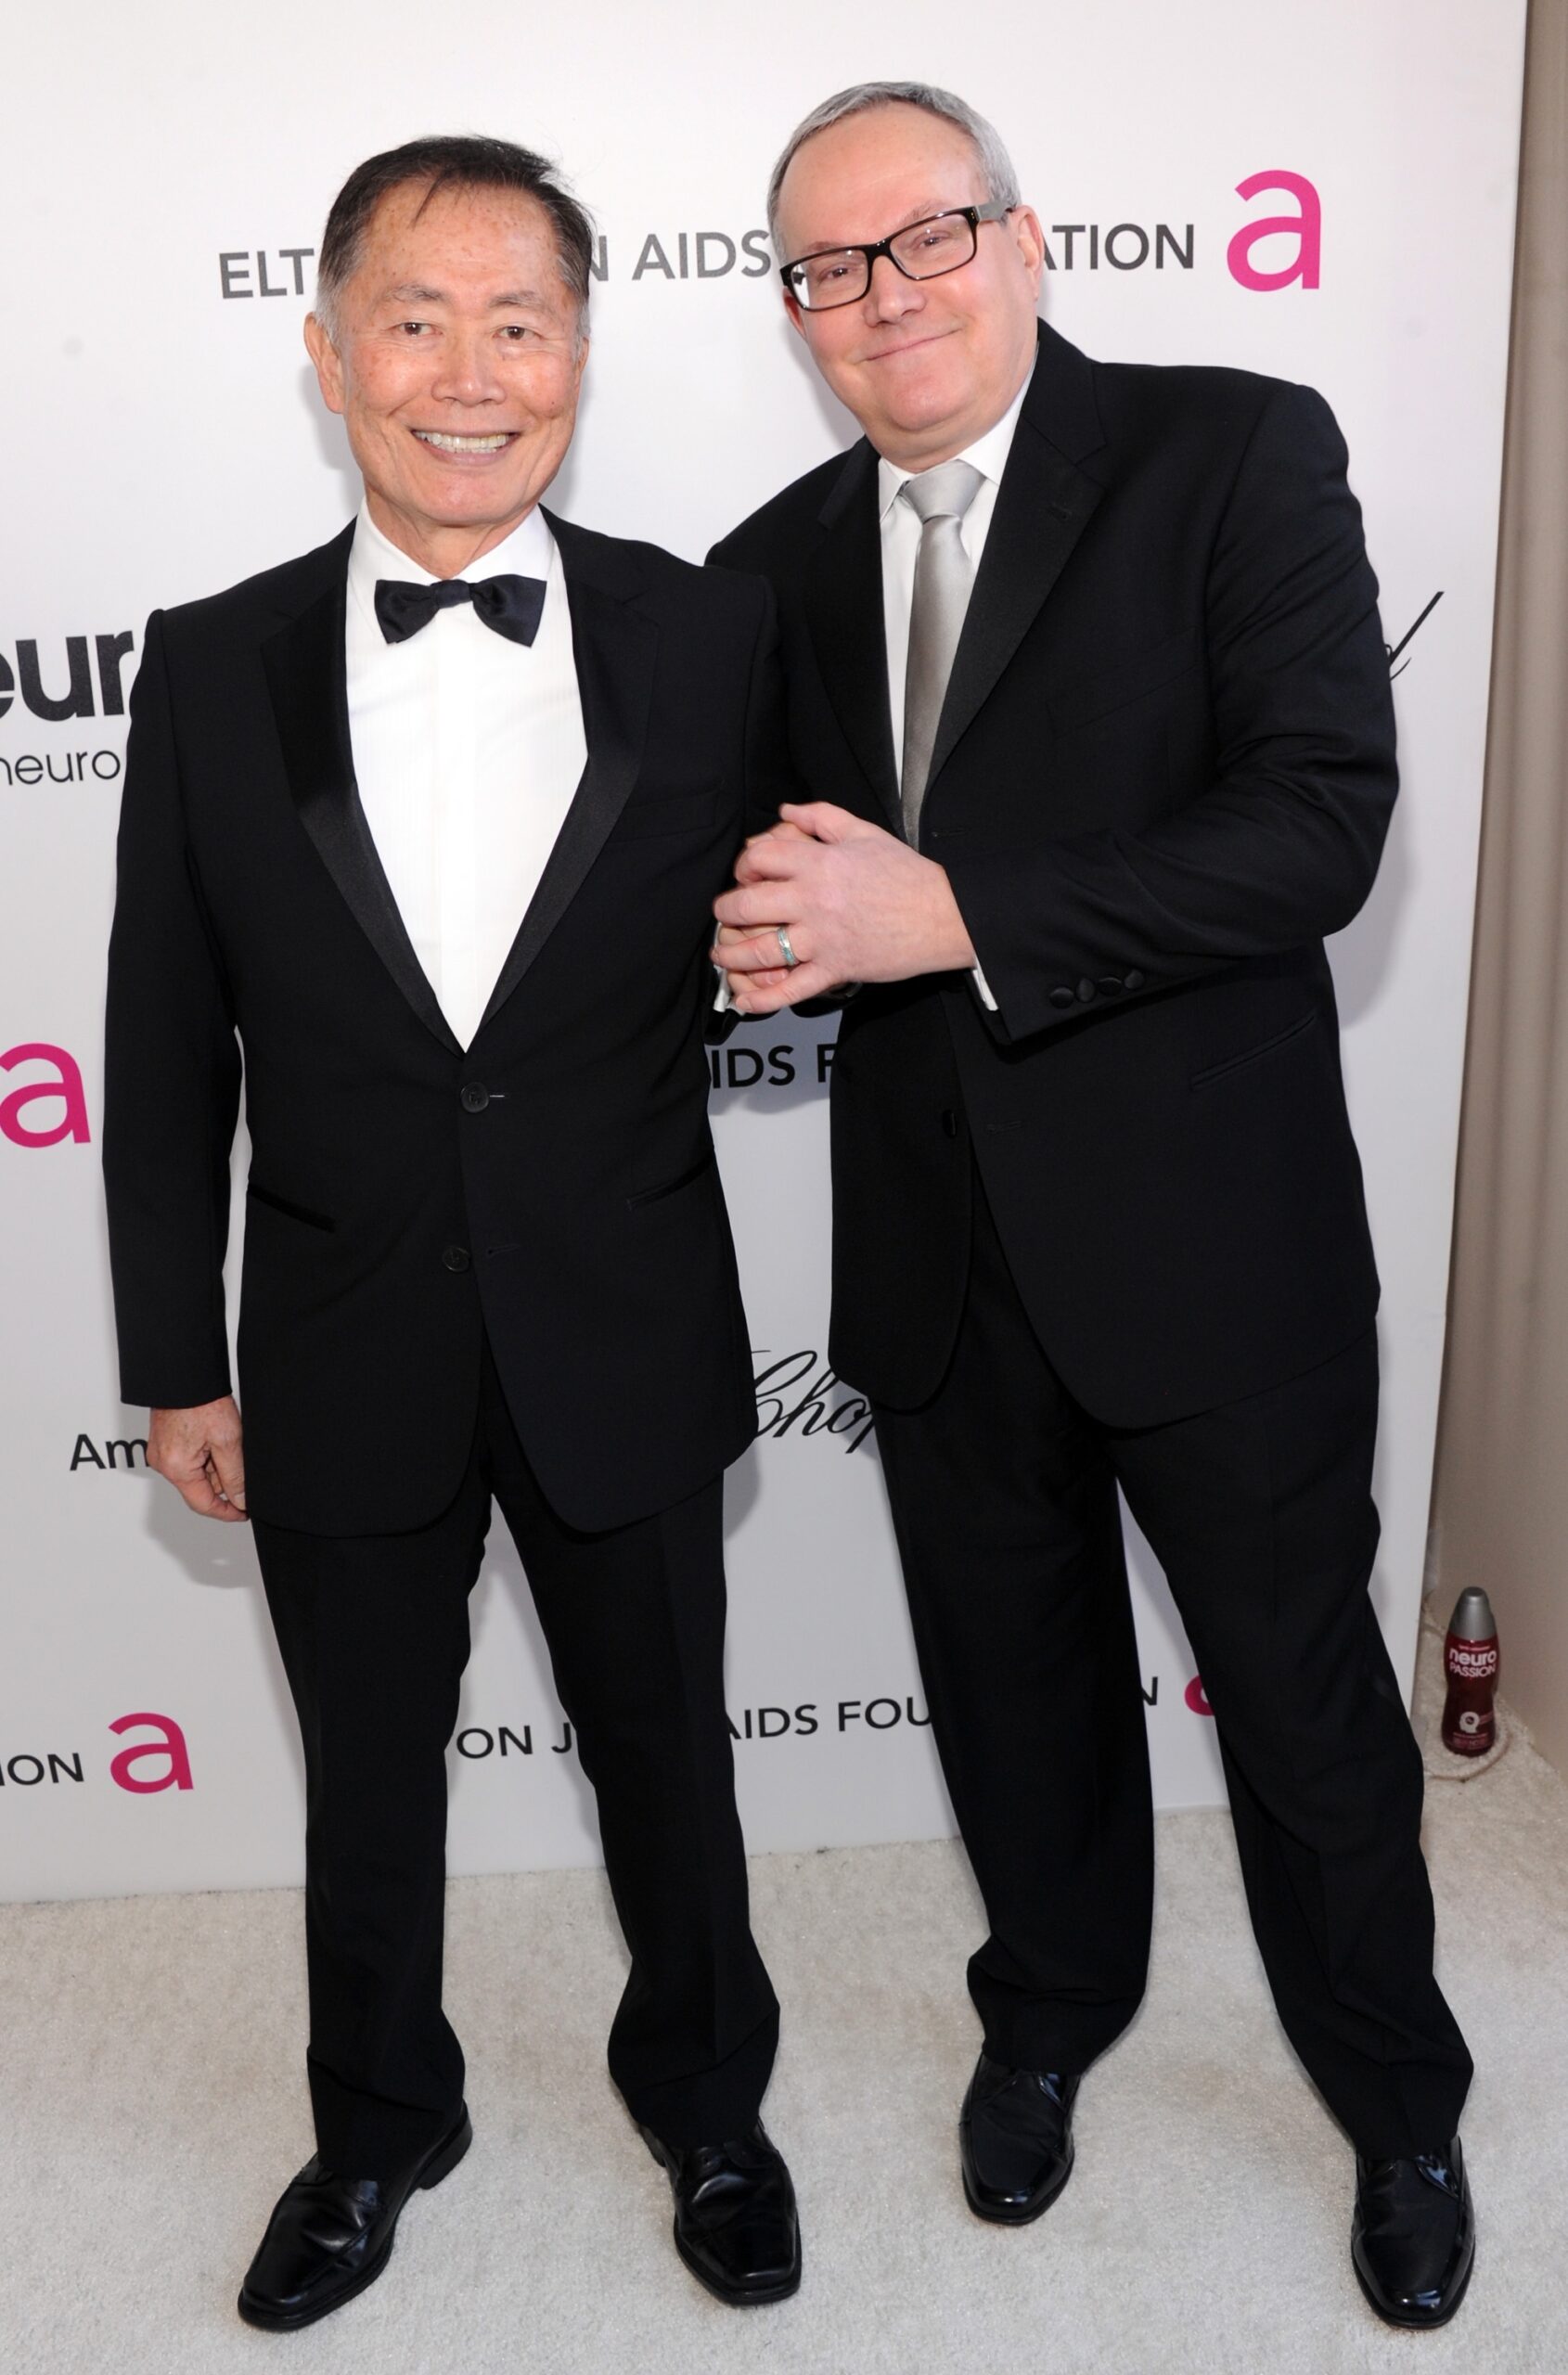 George With His Husband (Source: Access)